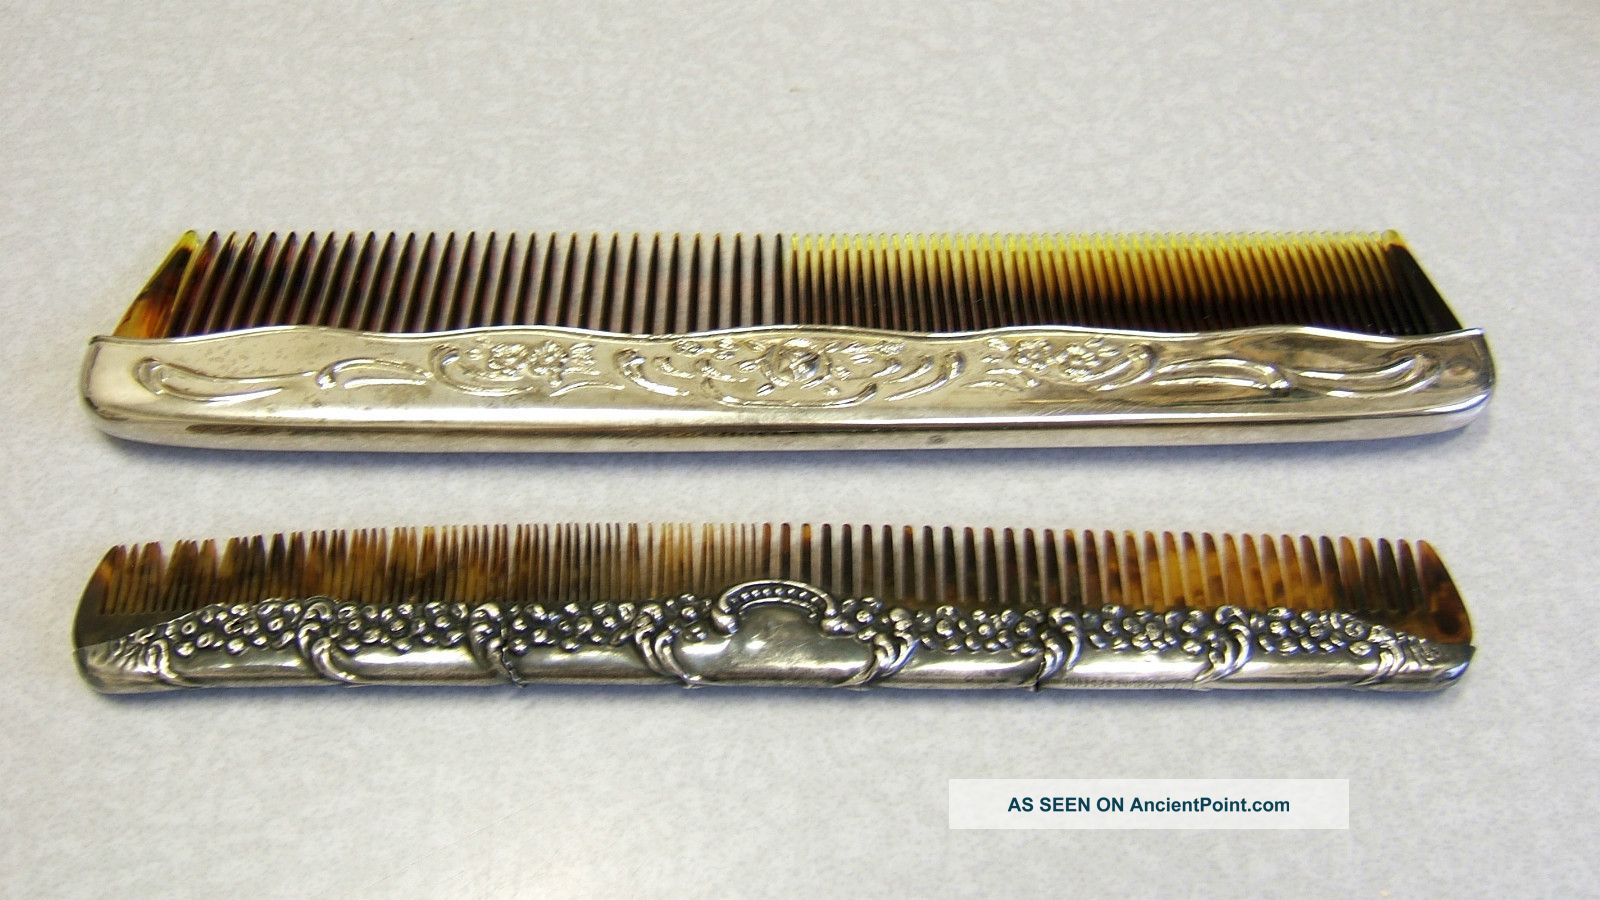 2 Antique Sterling Silver Vanity Comb Back Brushes & Grooming Sets photo